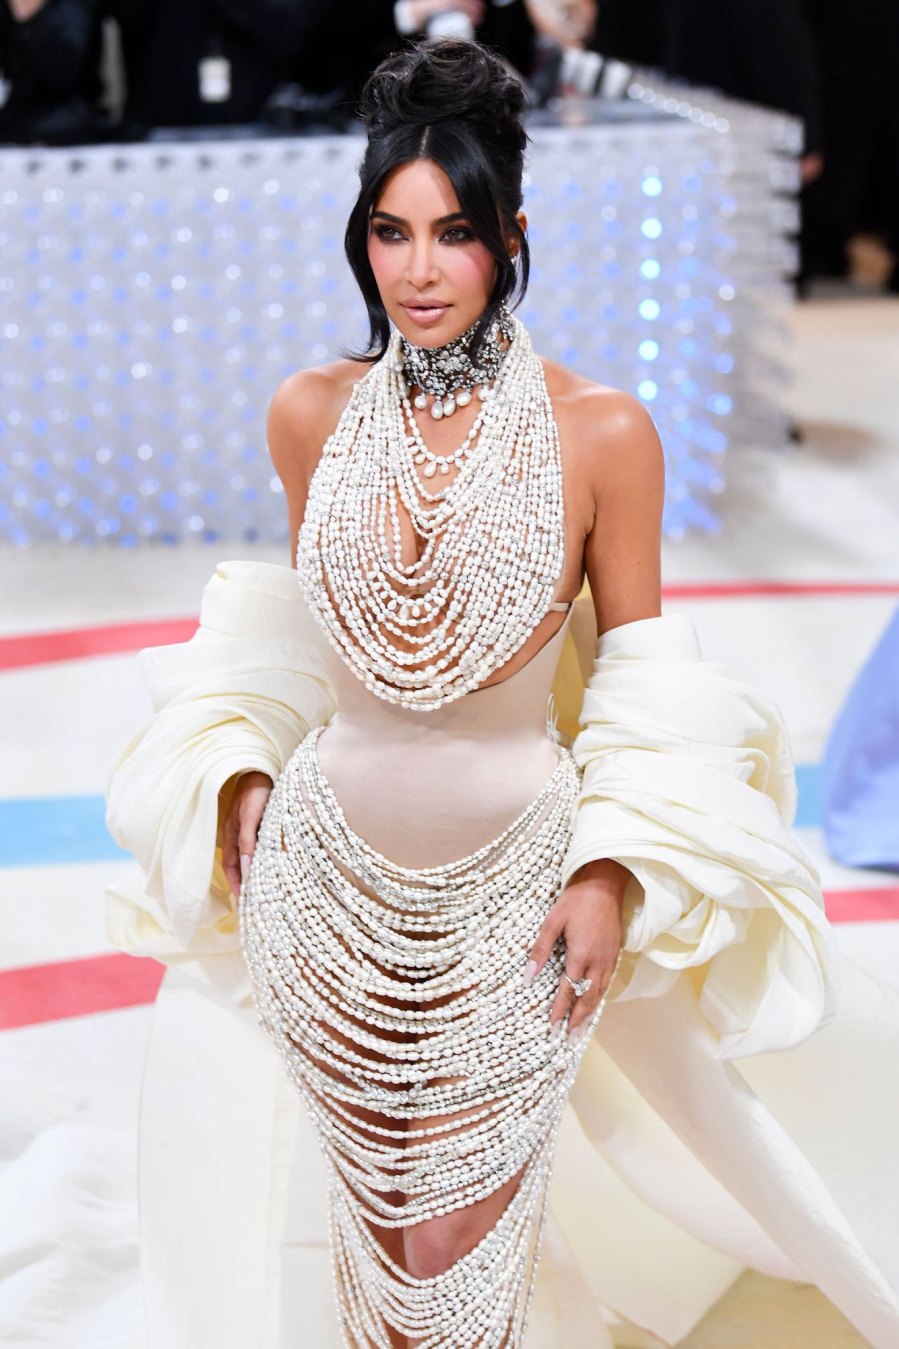 Kim Kardashian Covers Her Curves in 50000 Real Pearls for Met Gala